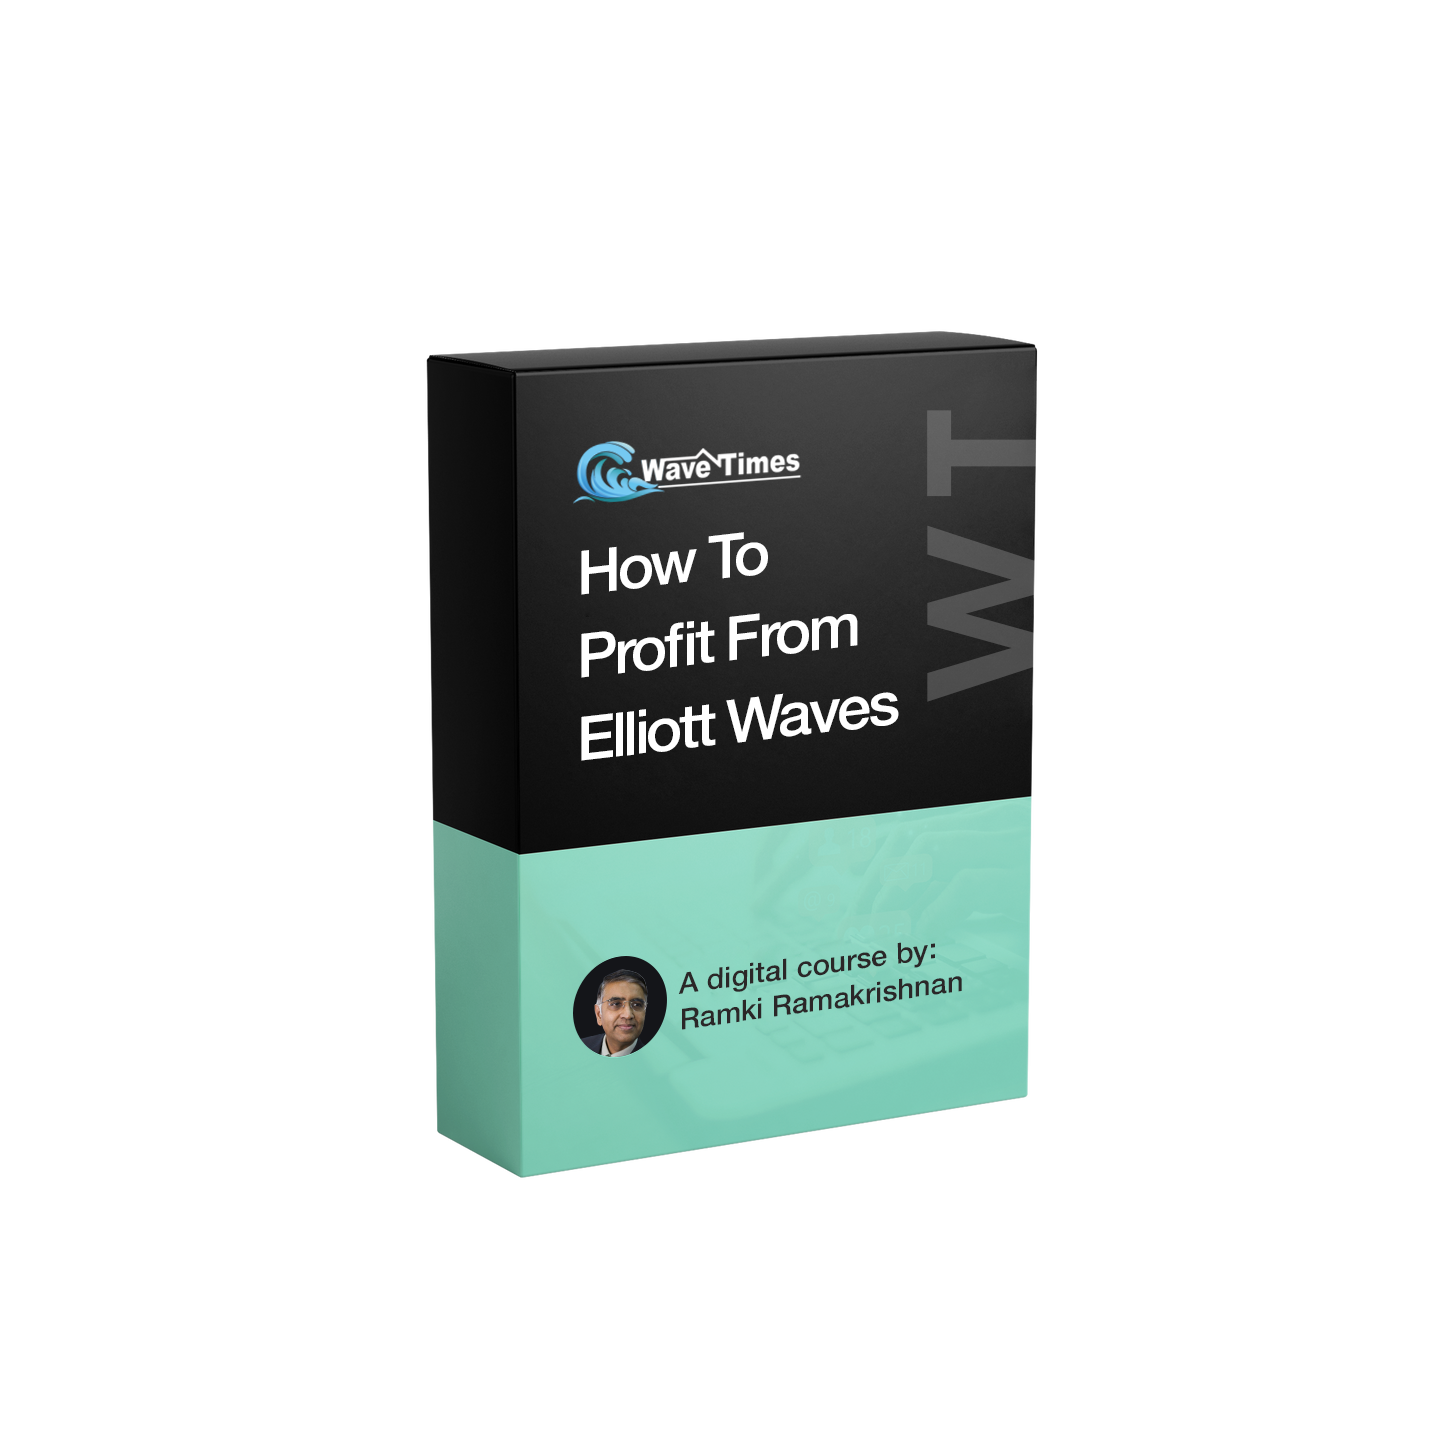 This image shows a box for the contents of the Elliott Wave course How to Profit from Elliott Waves. It also has the image of the author, Ramki Ramakrishnan